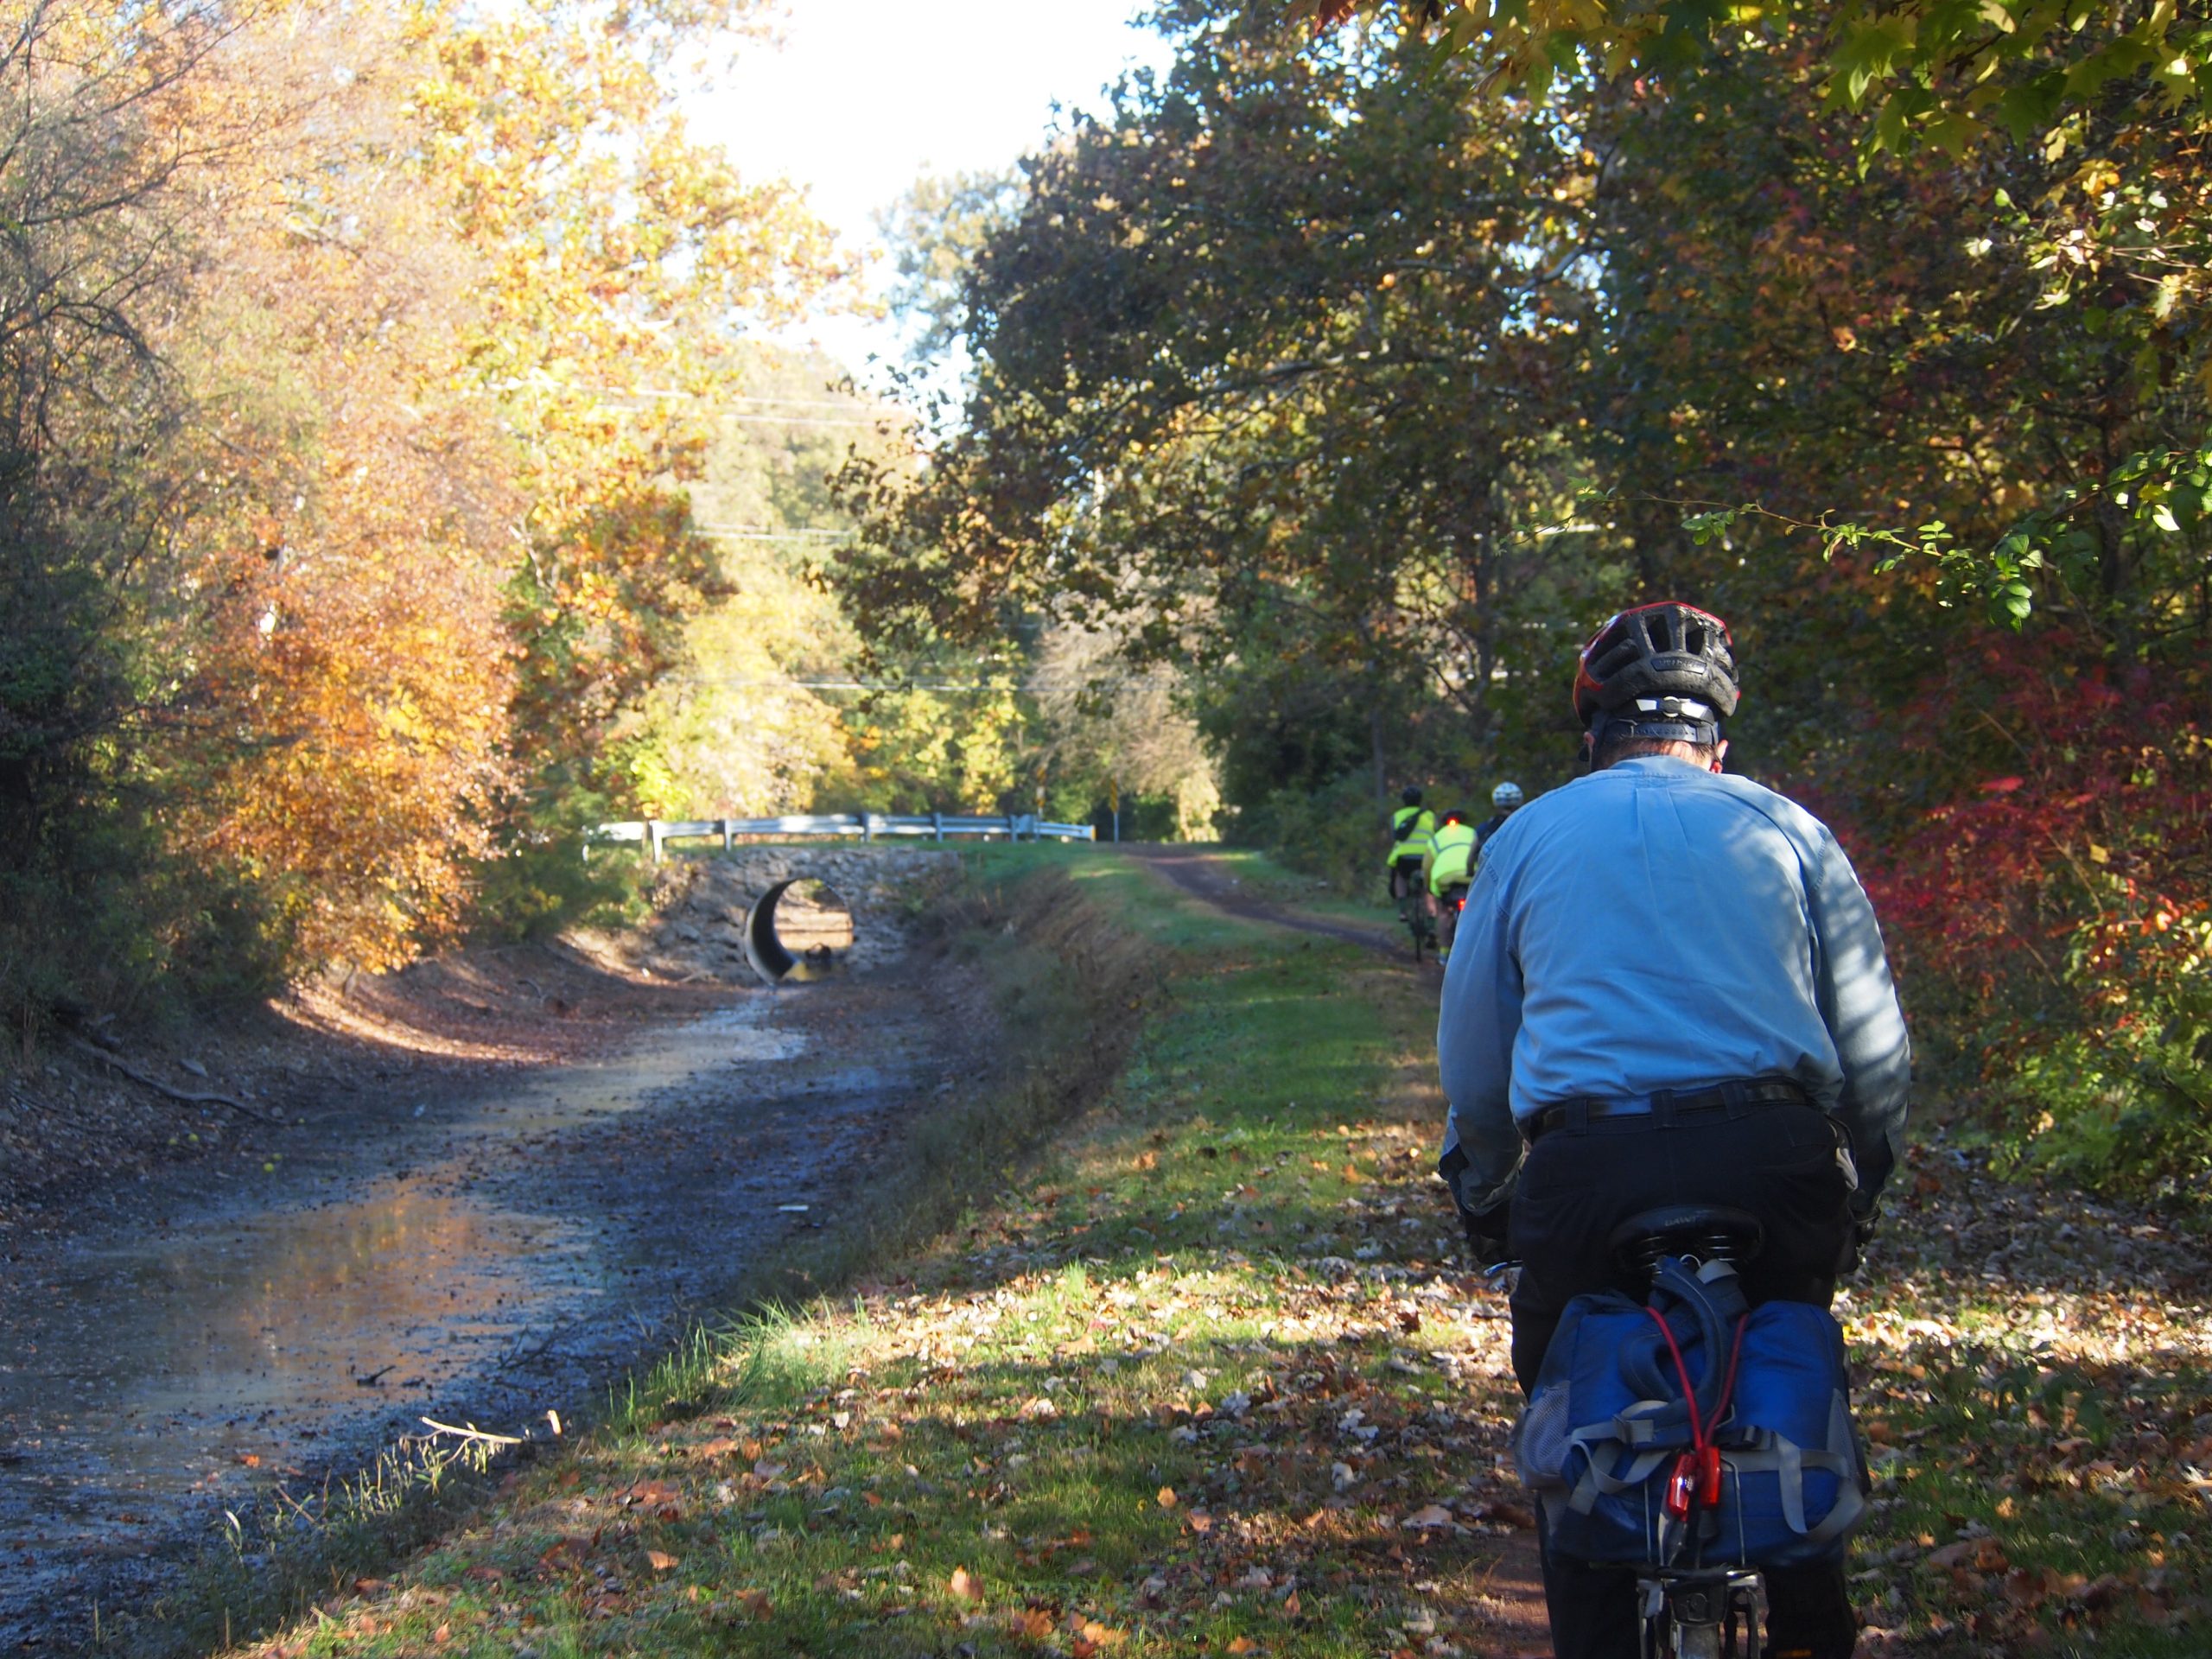 New Jersey's rail trails - New Jersey Conservation Foundation